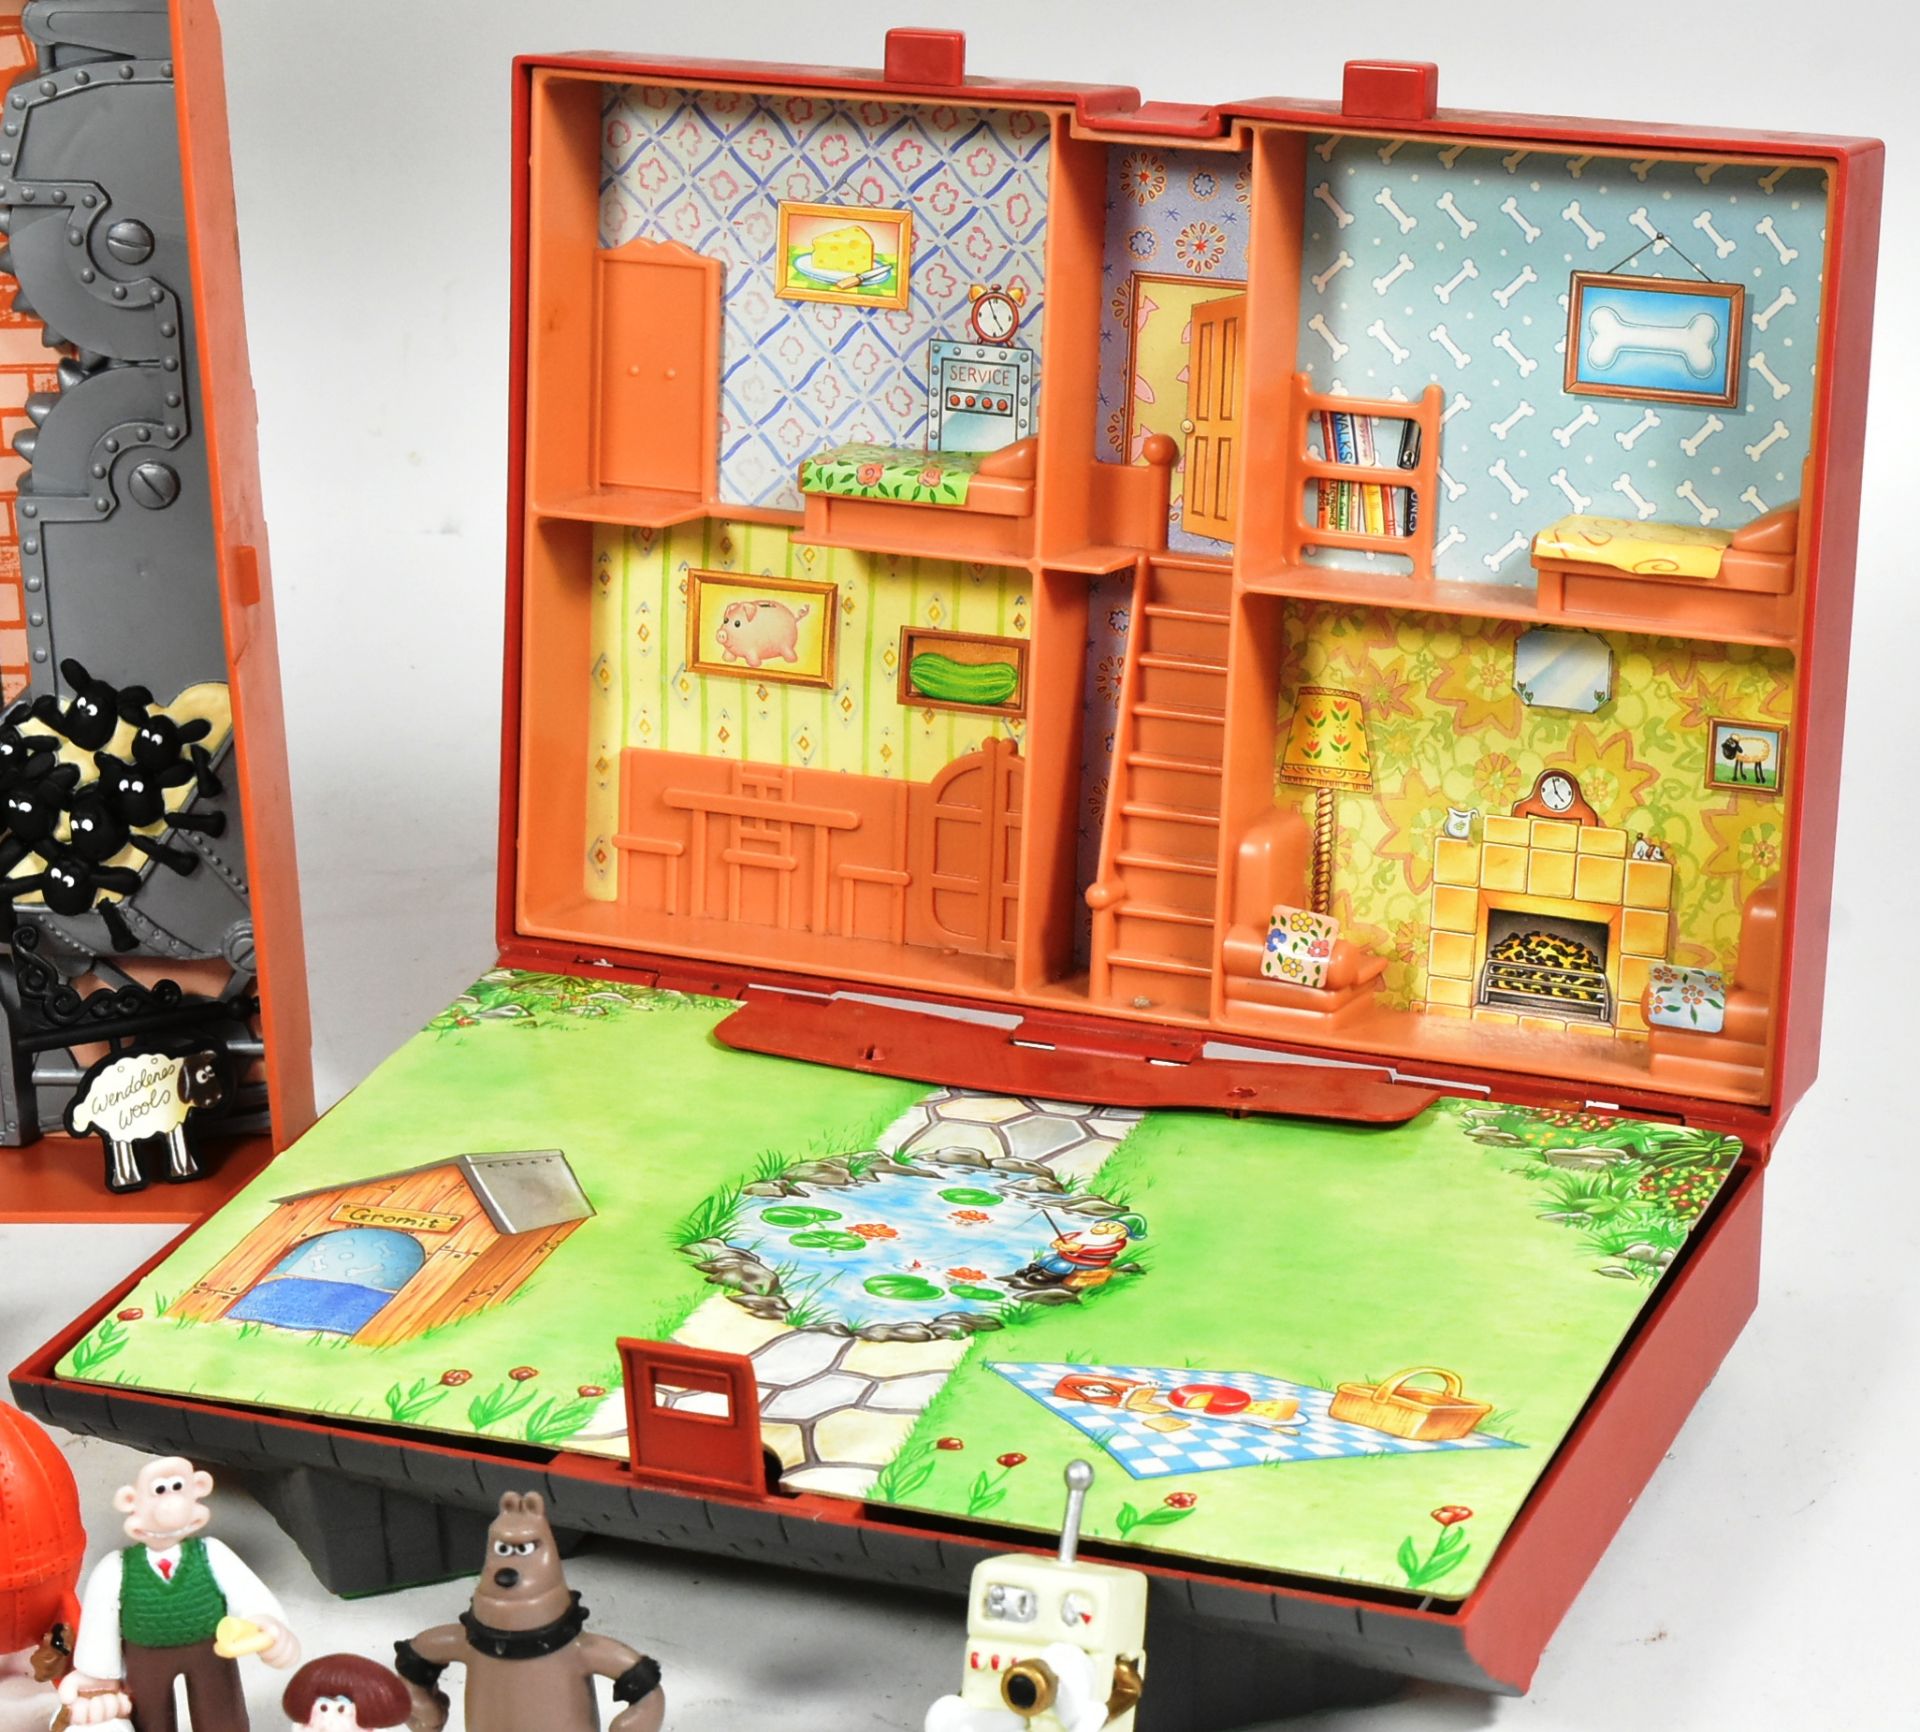 WALLACE & GROMIT - VINTAGE CARRY CASE PLAYSETS - Image 2 of 6